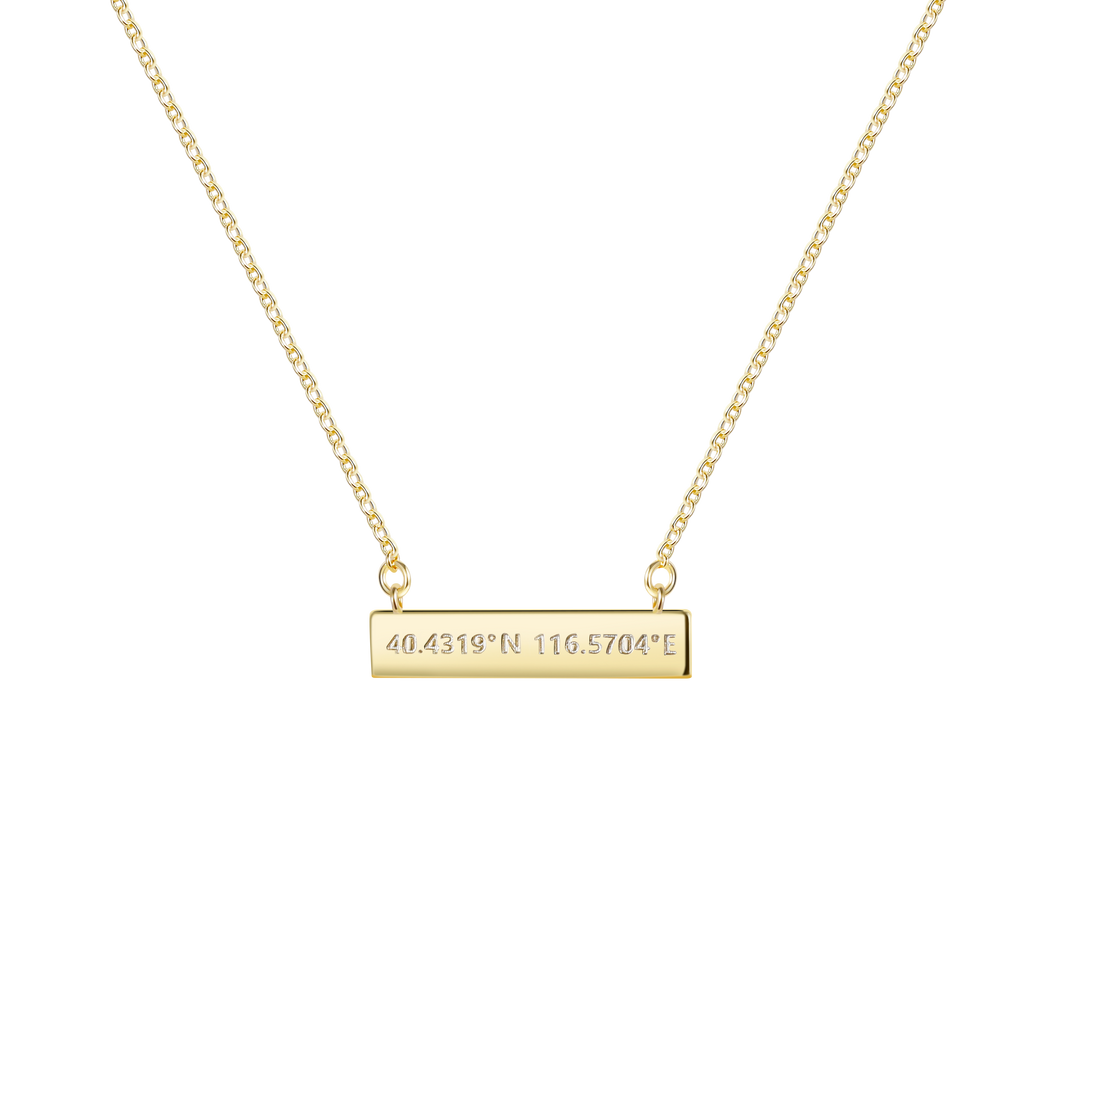 bar necklace for women, personalized necklace, solid gold pendant